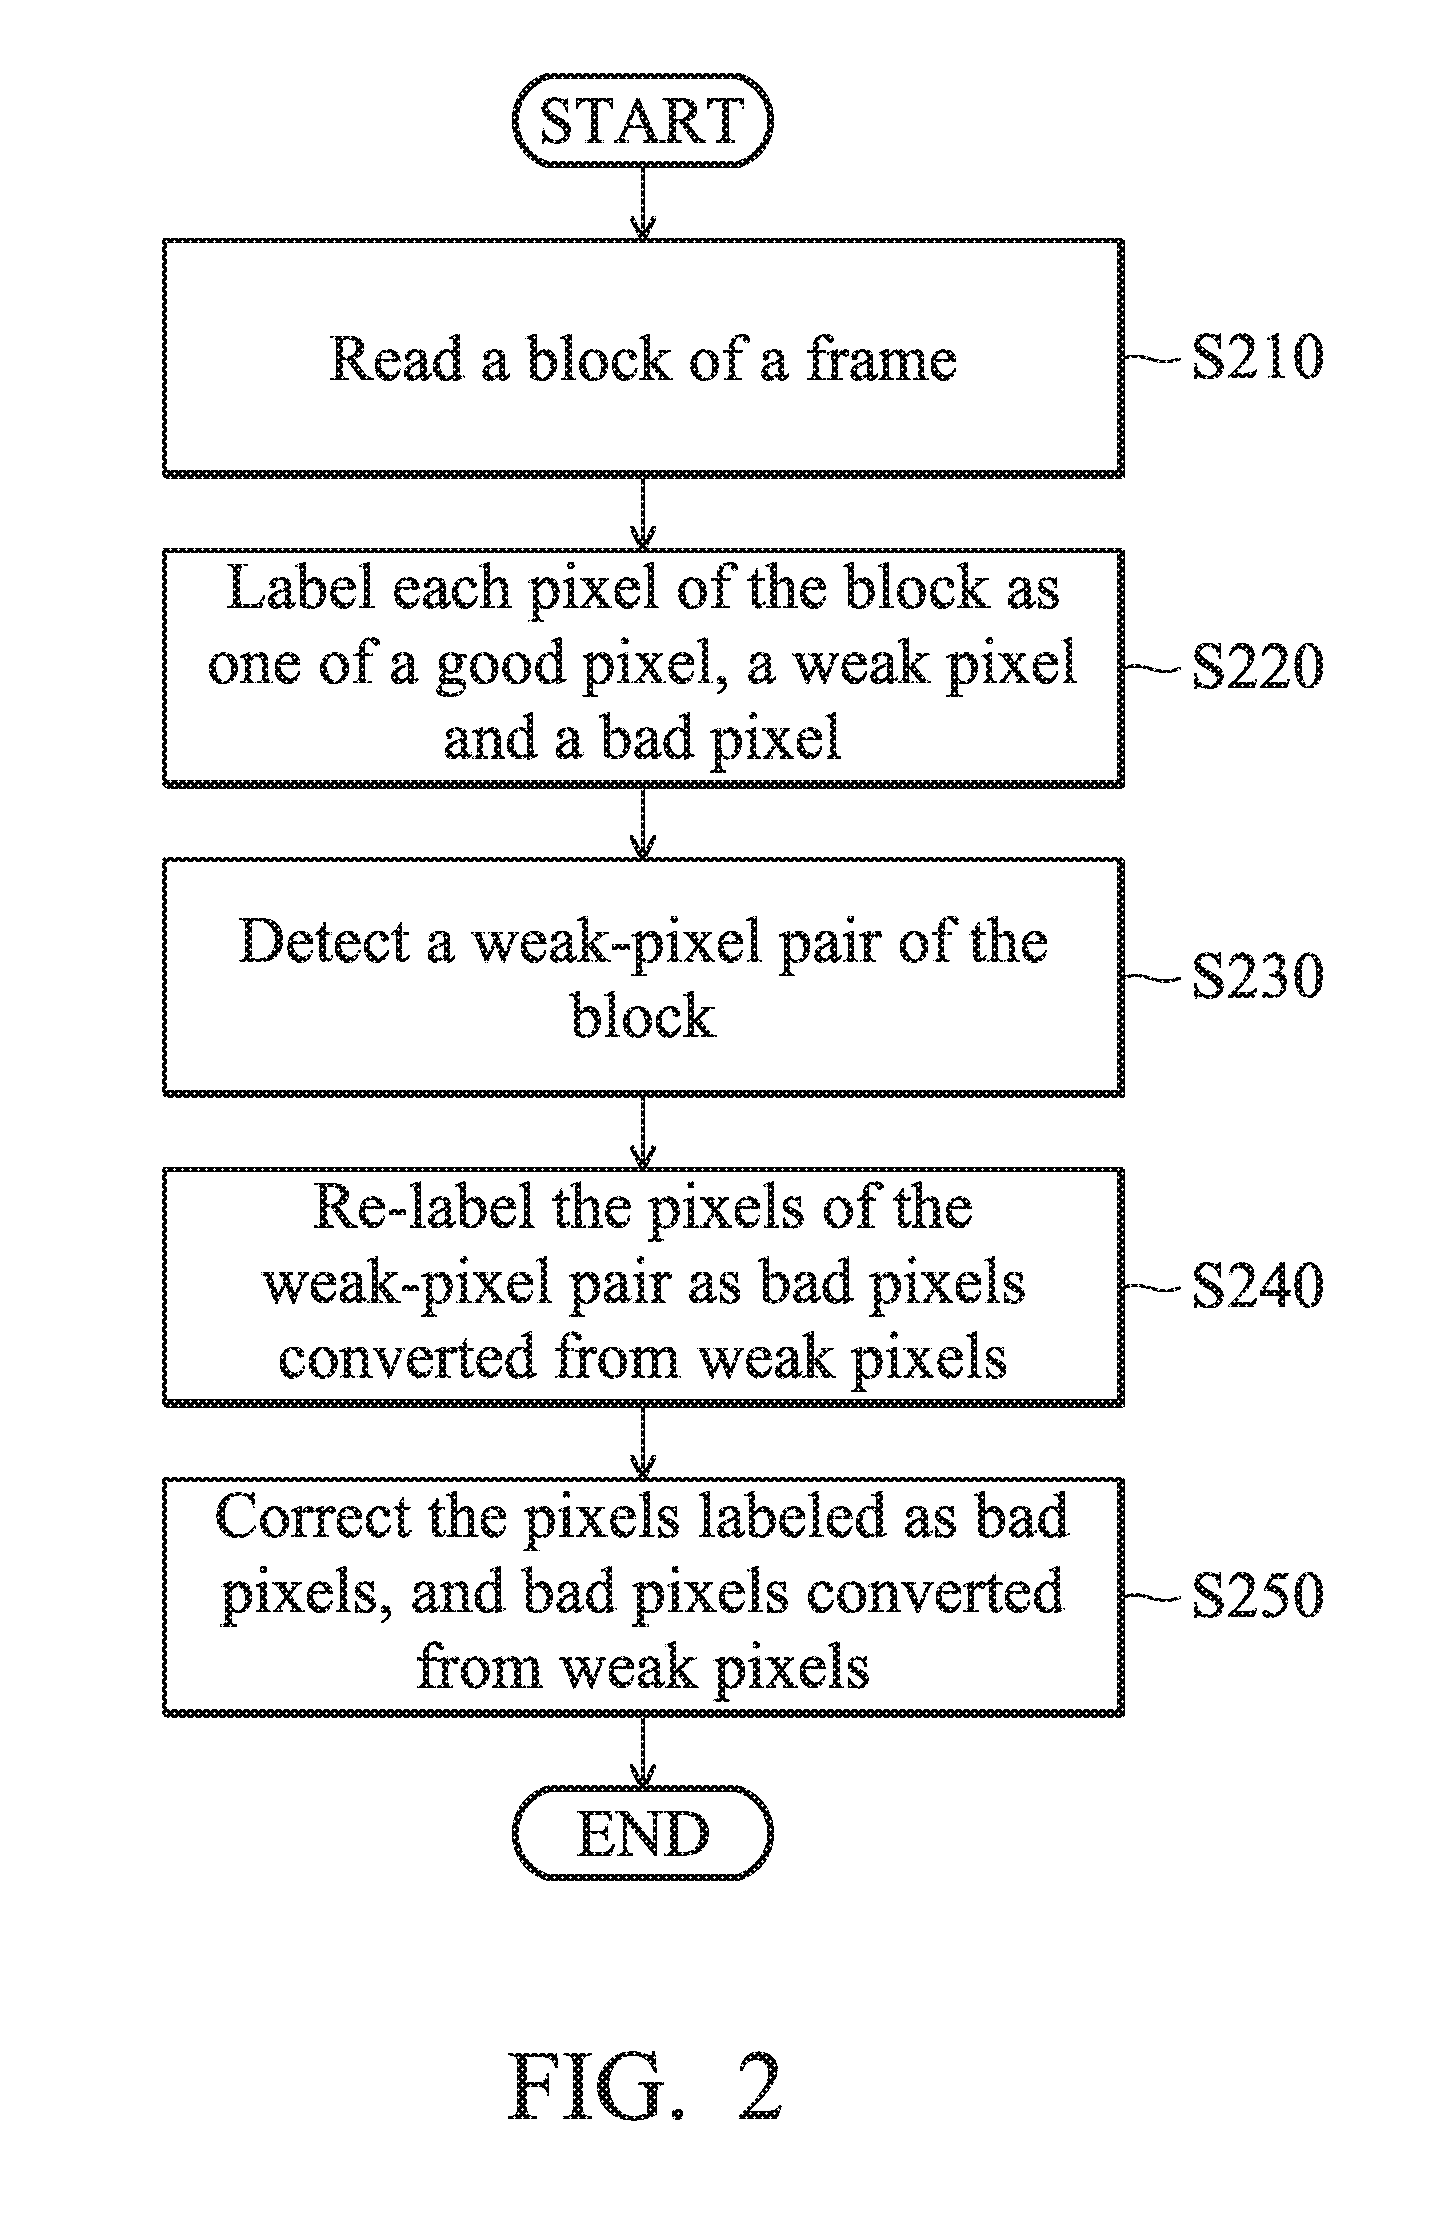 Methods for correcting bad pixels and apparatuses using the same